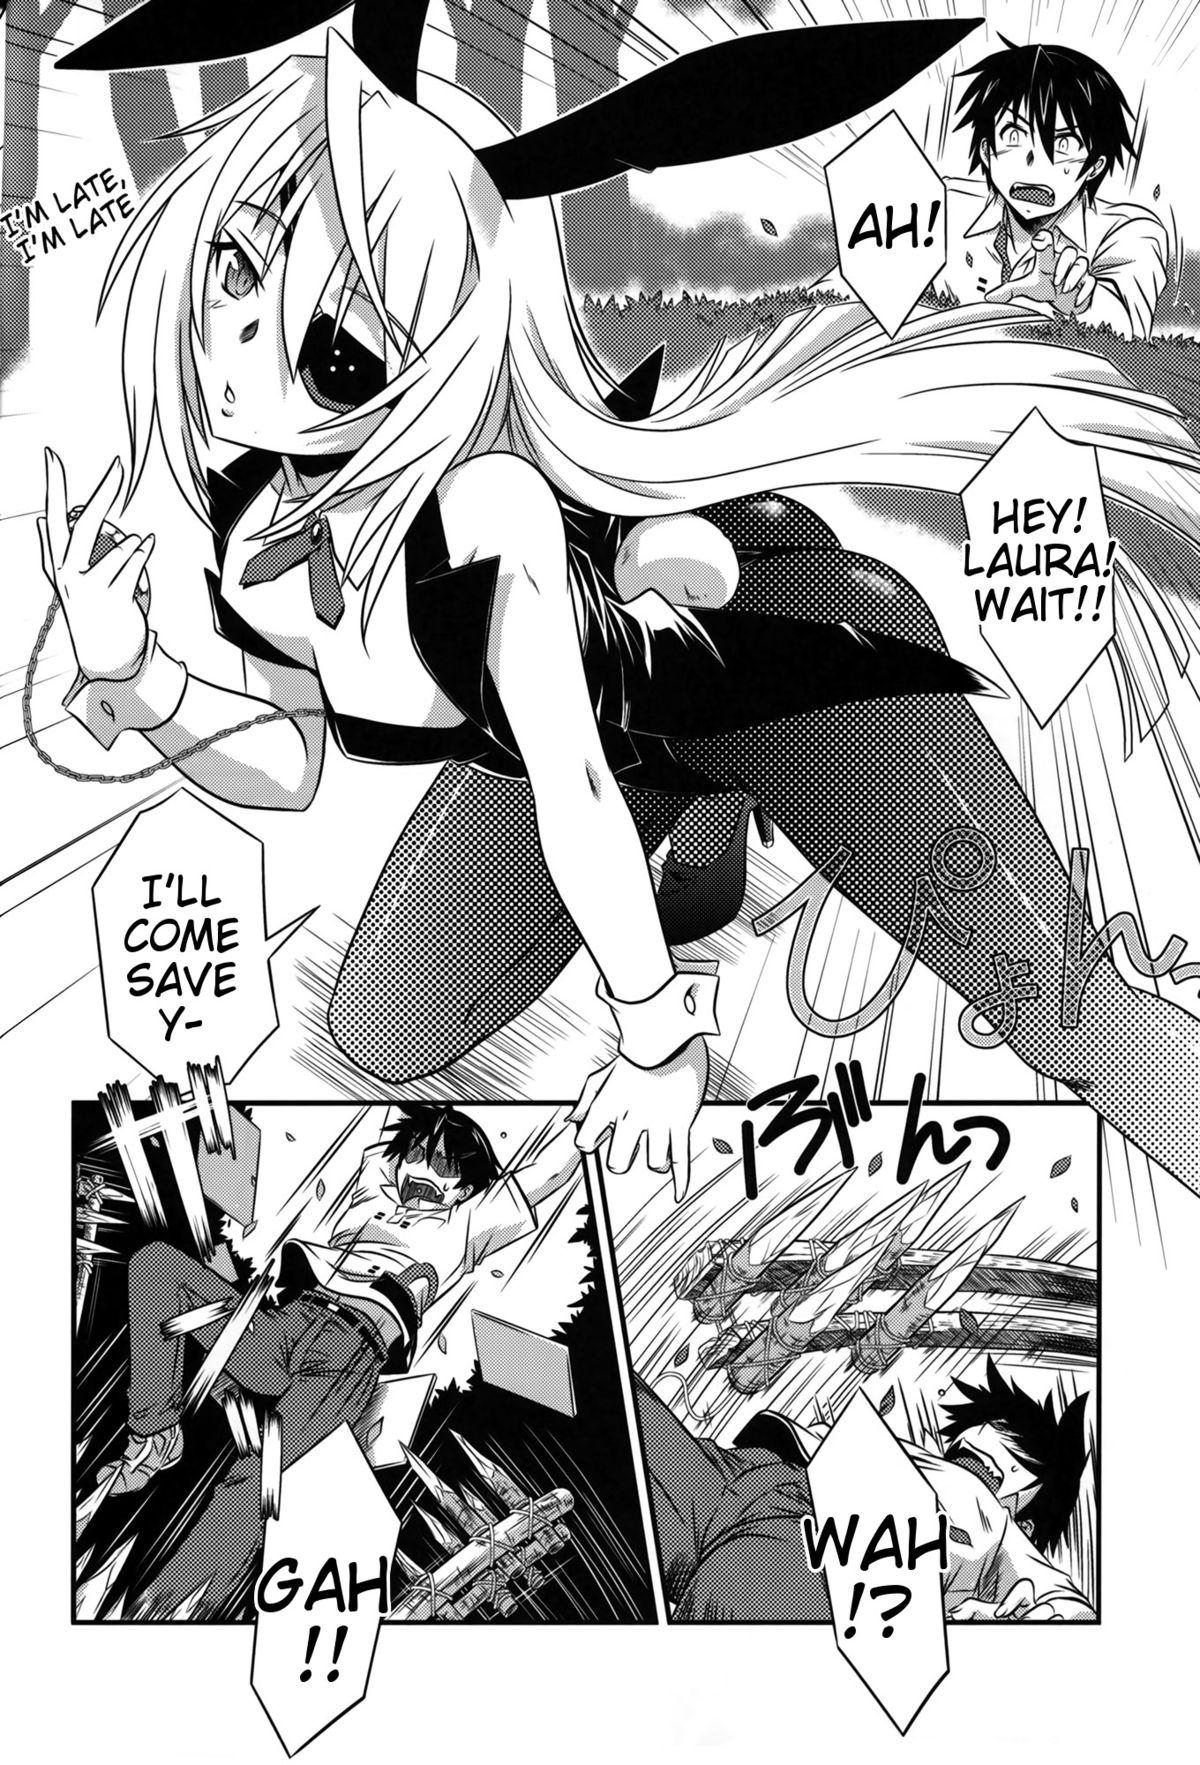 Hardcore is Incest Strategy 4 - Infinite stratos Negao - Page 4